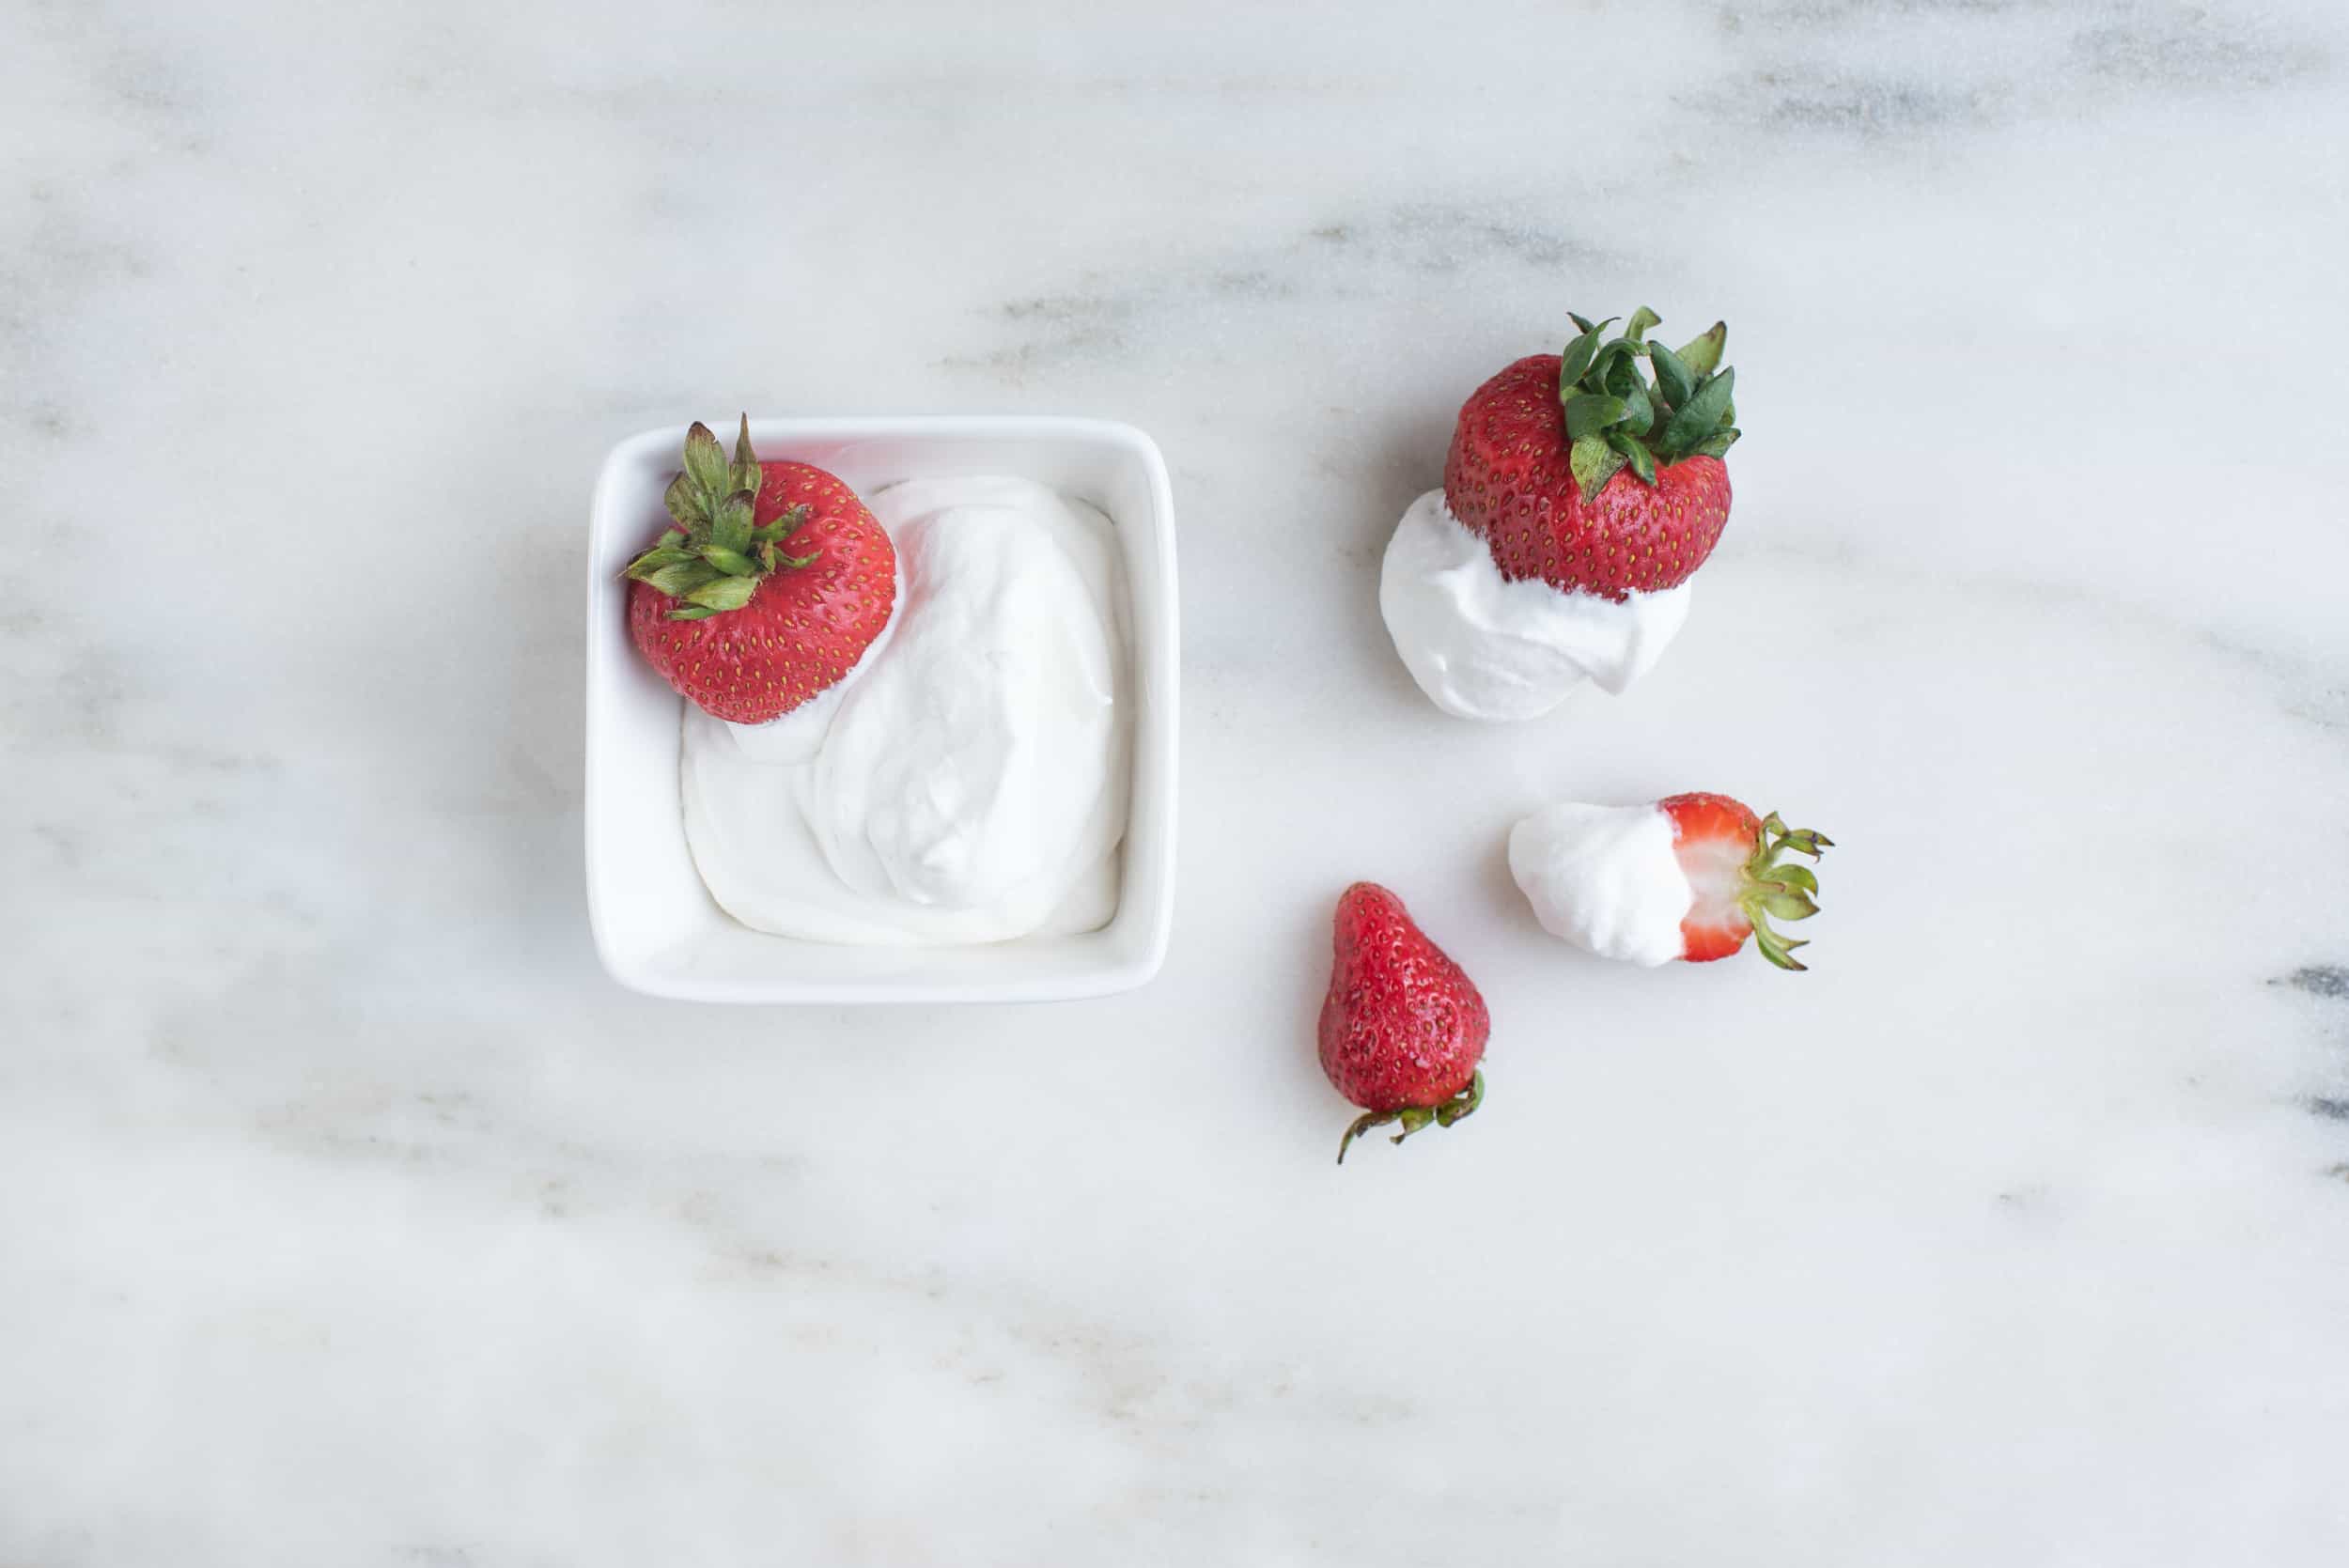 a square bowl filled with whipped cream and one whole strawberry, next to two strawberries that have been dipped in whipped cream and one small strawberry with no cream on it